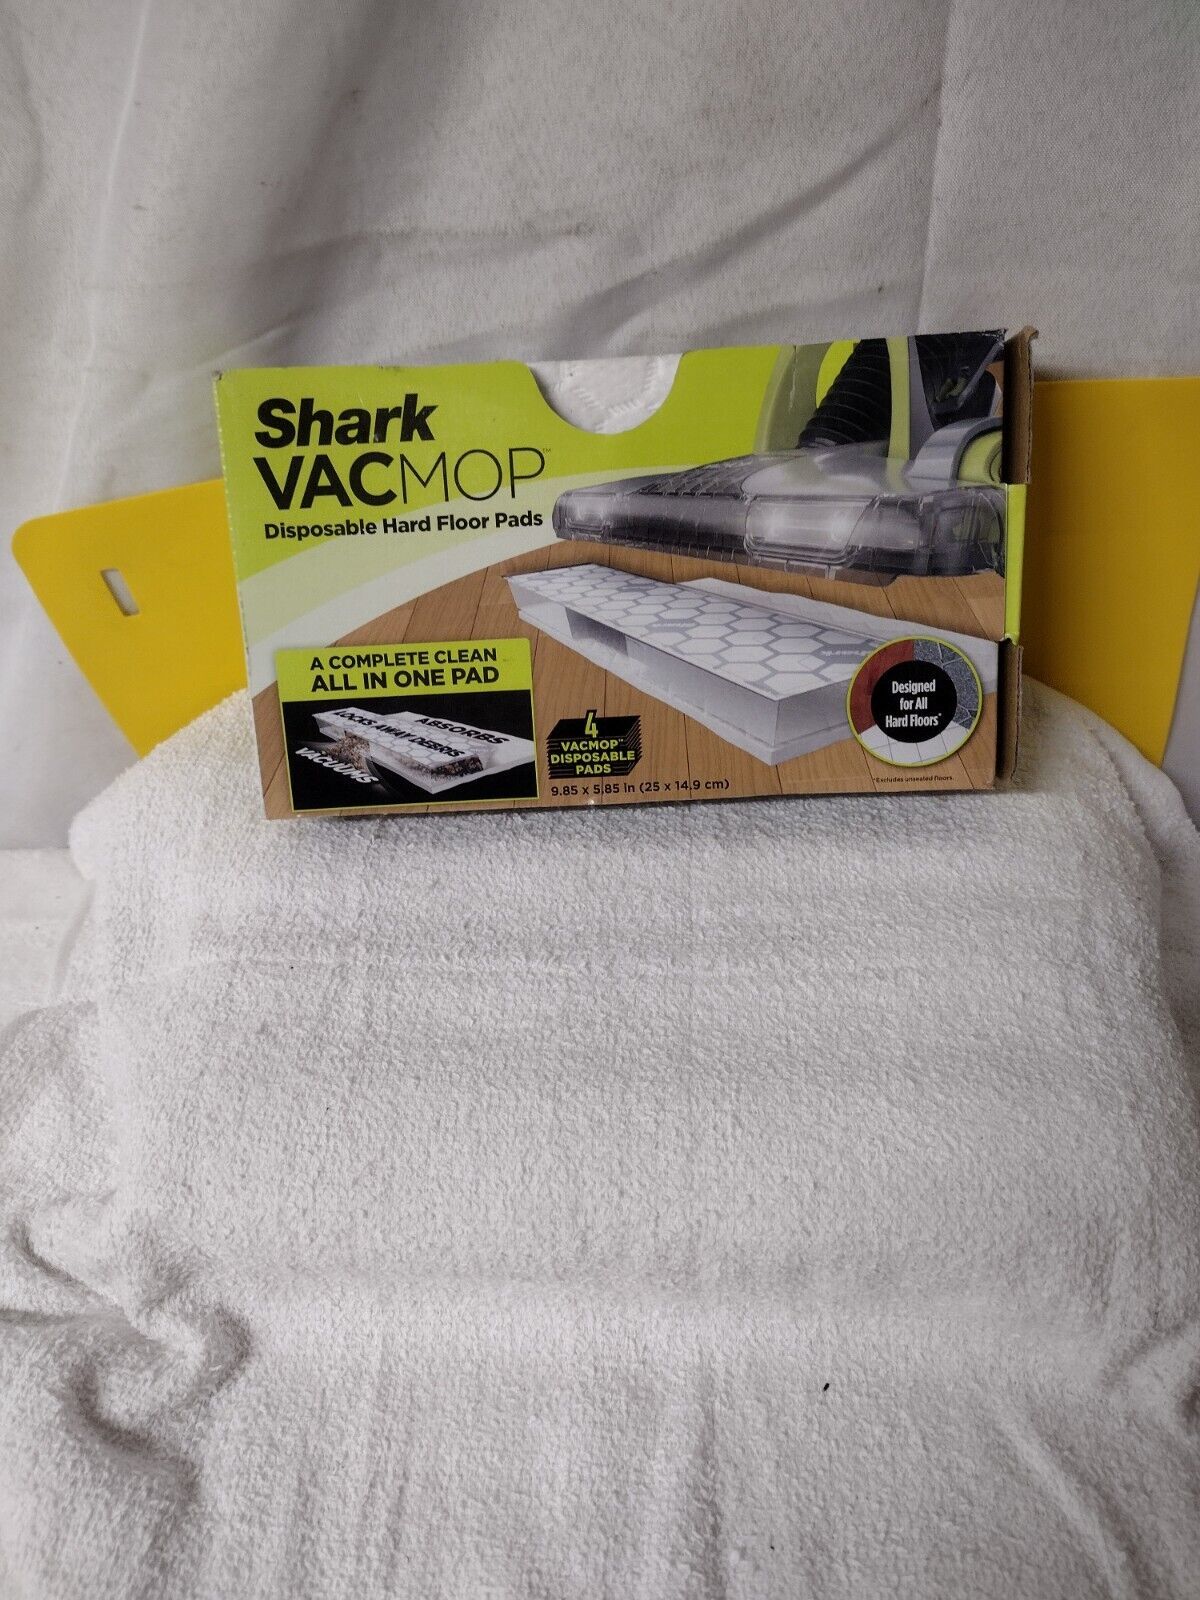 New, Shark VacMop Disposable Hard Floor Pads Pack of 4 9.85"x5.85" For All Floor - $17.95